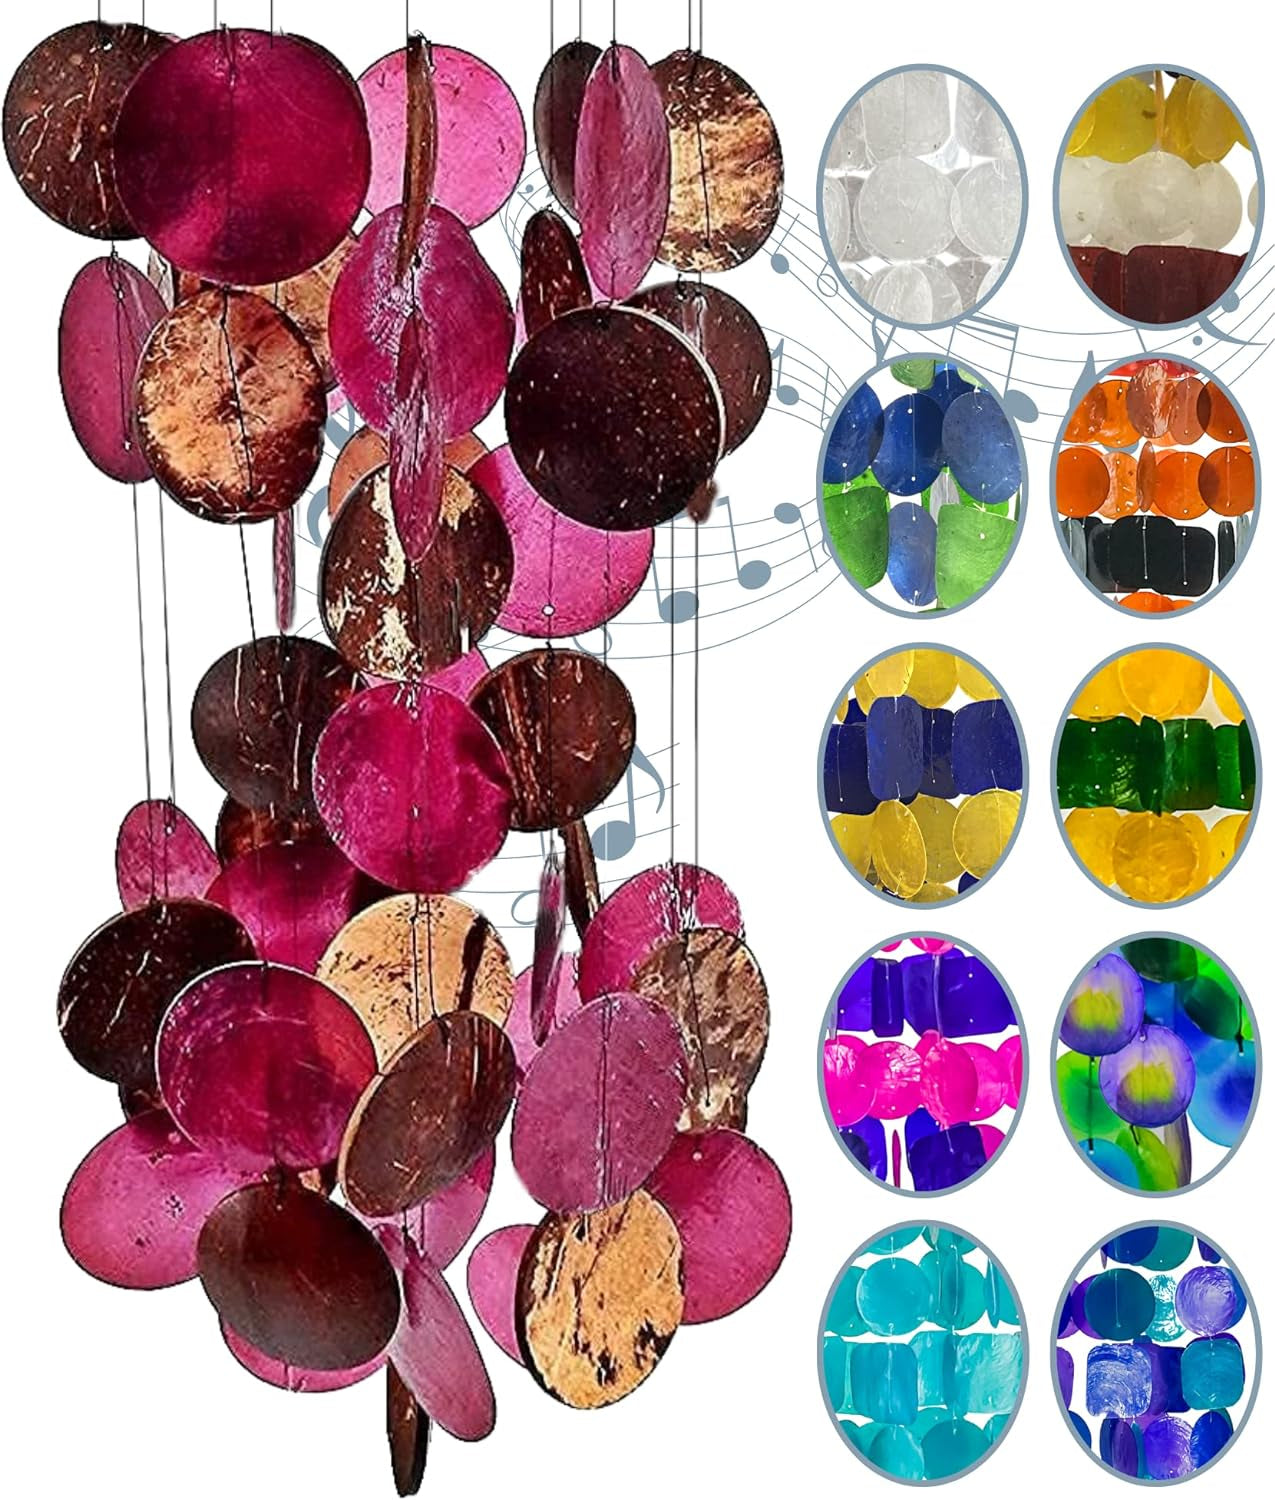 Capiz Wind Chimes Rainbow Sea Glass Shells Large outside Windchimes Home Decor Outdoor Garden Patio Yard Lawn Unique Gifts for Mom Grandma Woman Sympathy Memorial Remembrance